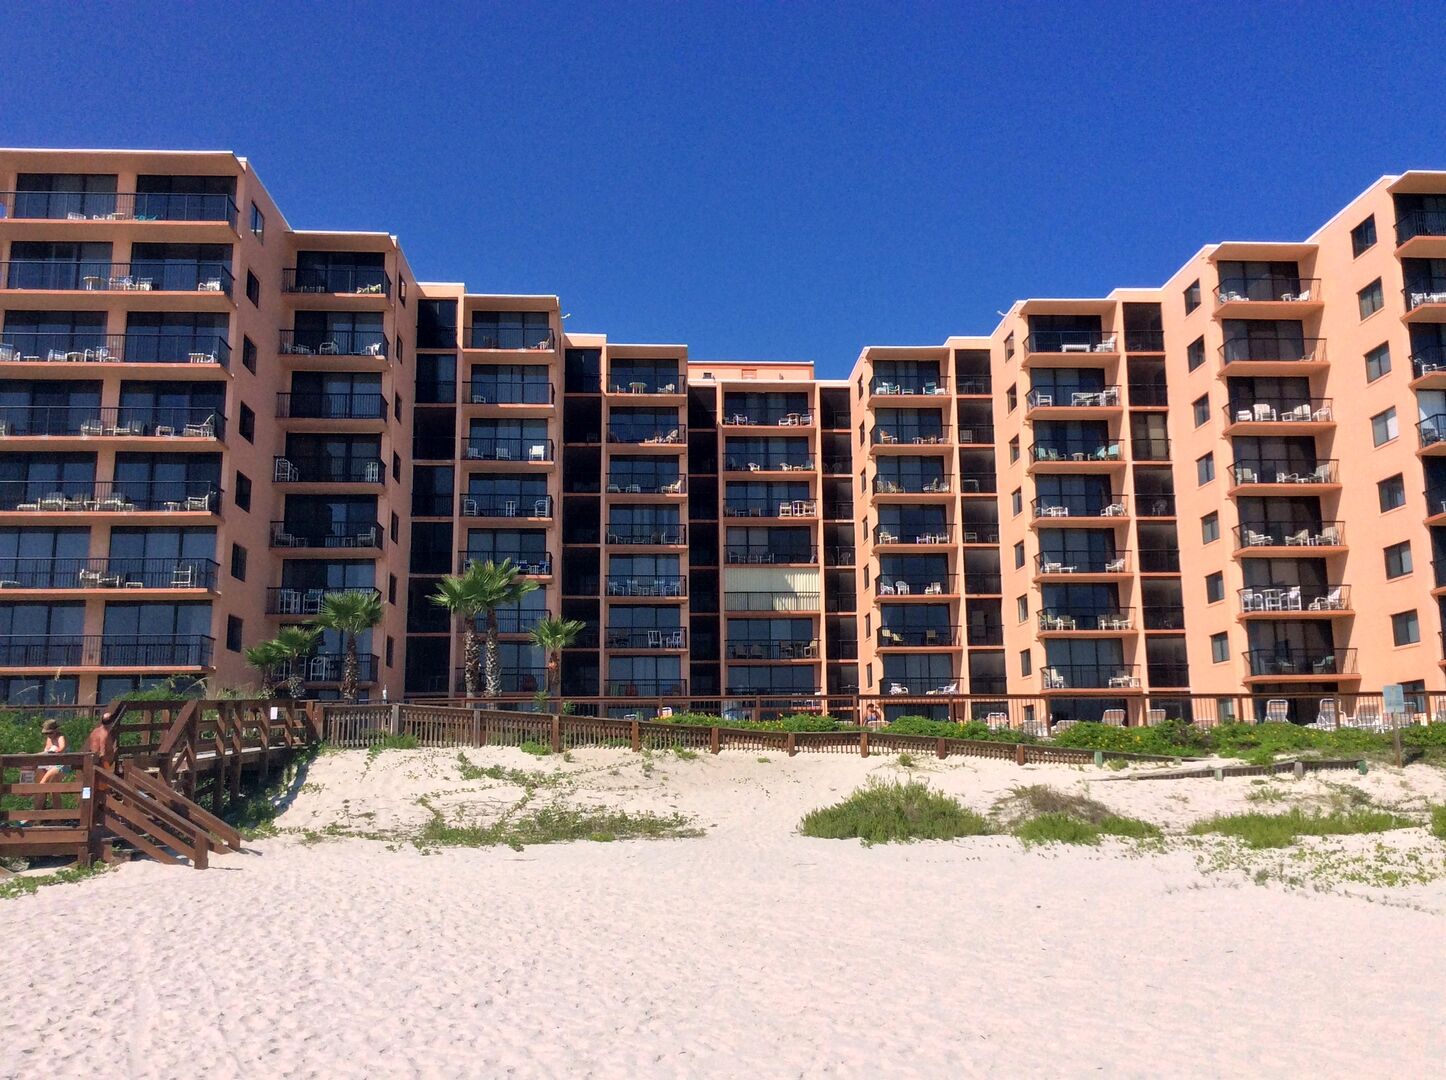 Sunrise Condominiums, home of this vacation condo in New Smyrna Beach, from the beach.